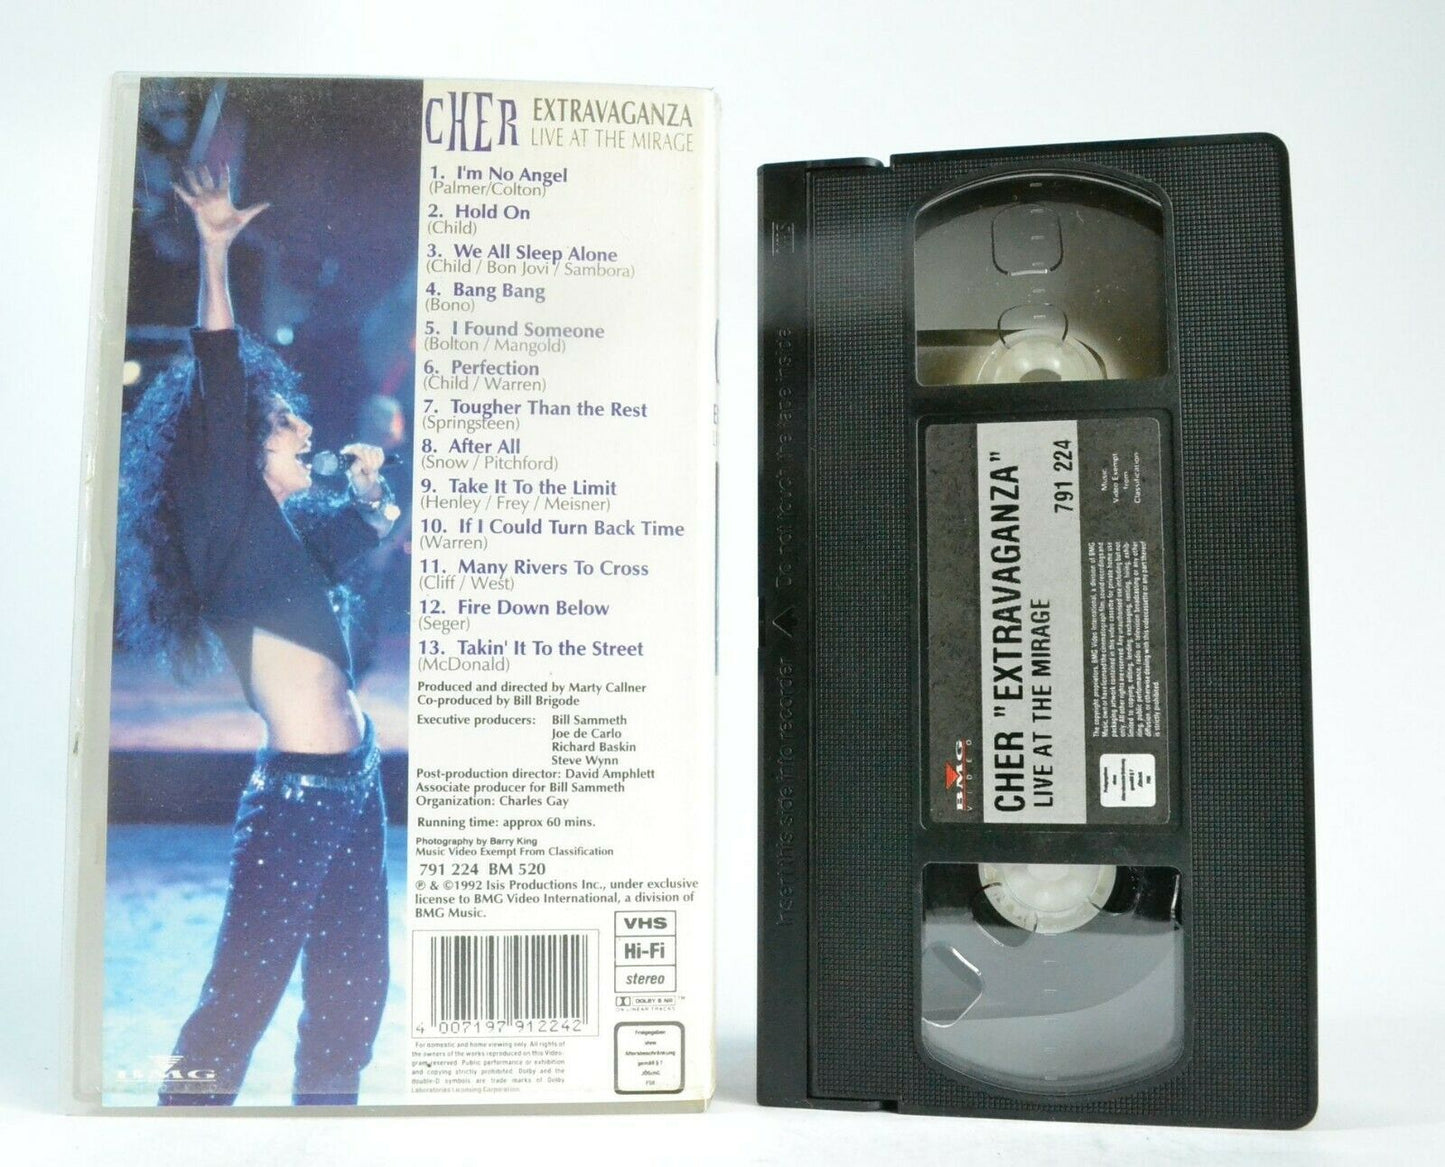 Cher: Extravaganza [Live At The Mirage] Concert -'I'm No Angel'- Music - VHS-